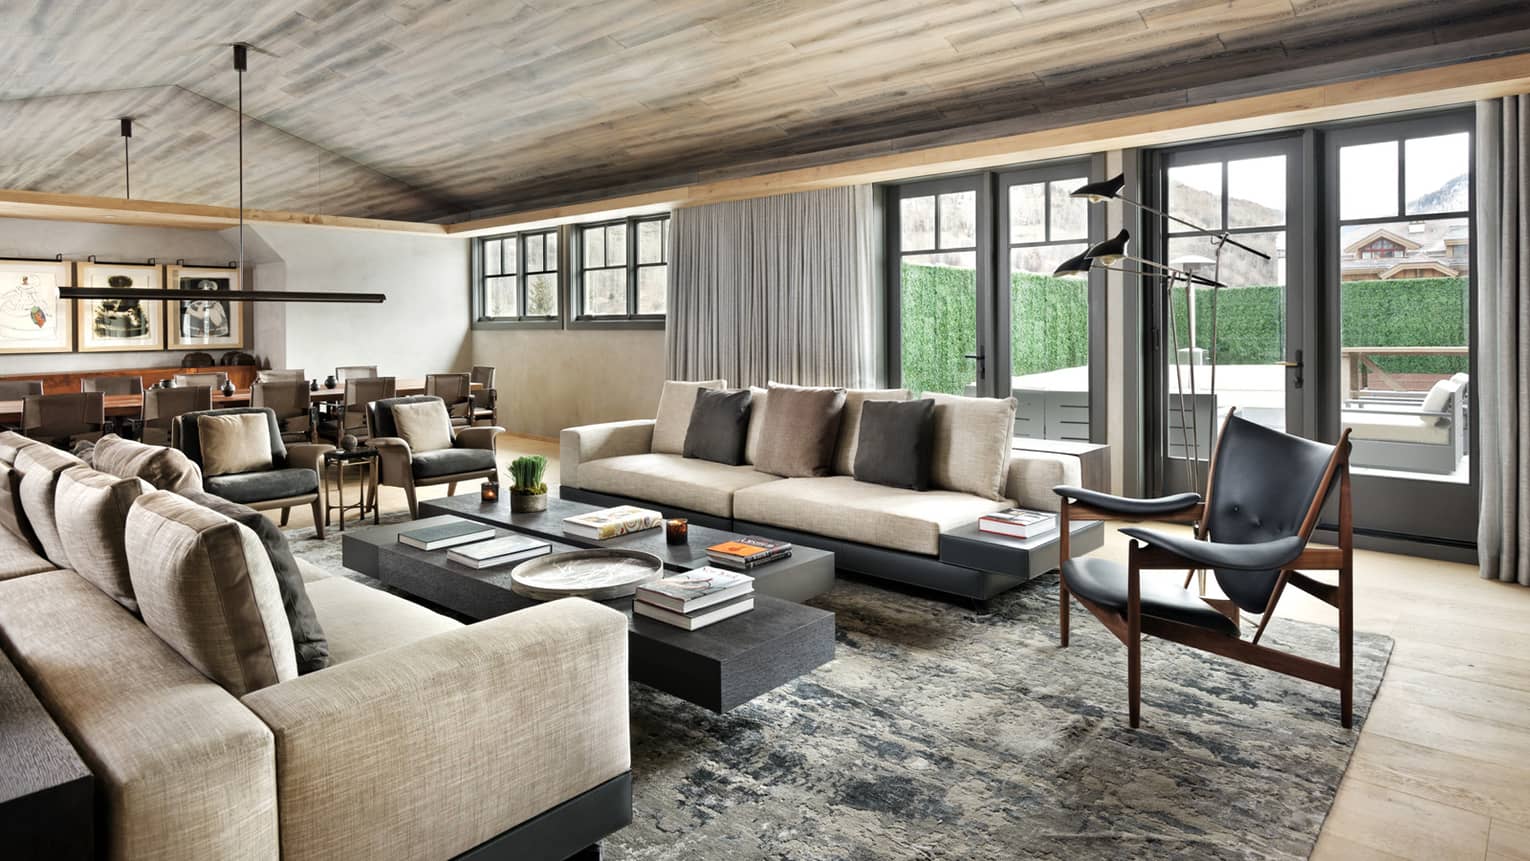 Long plush sofas, modern leather armchairs around large coffee table in bright living room